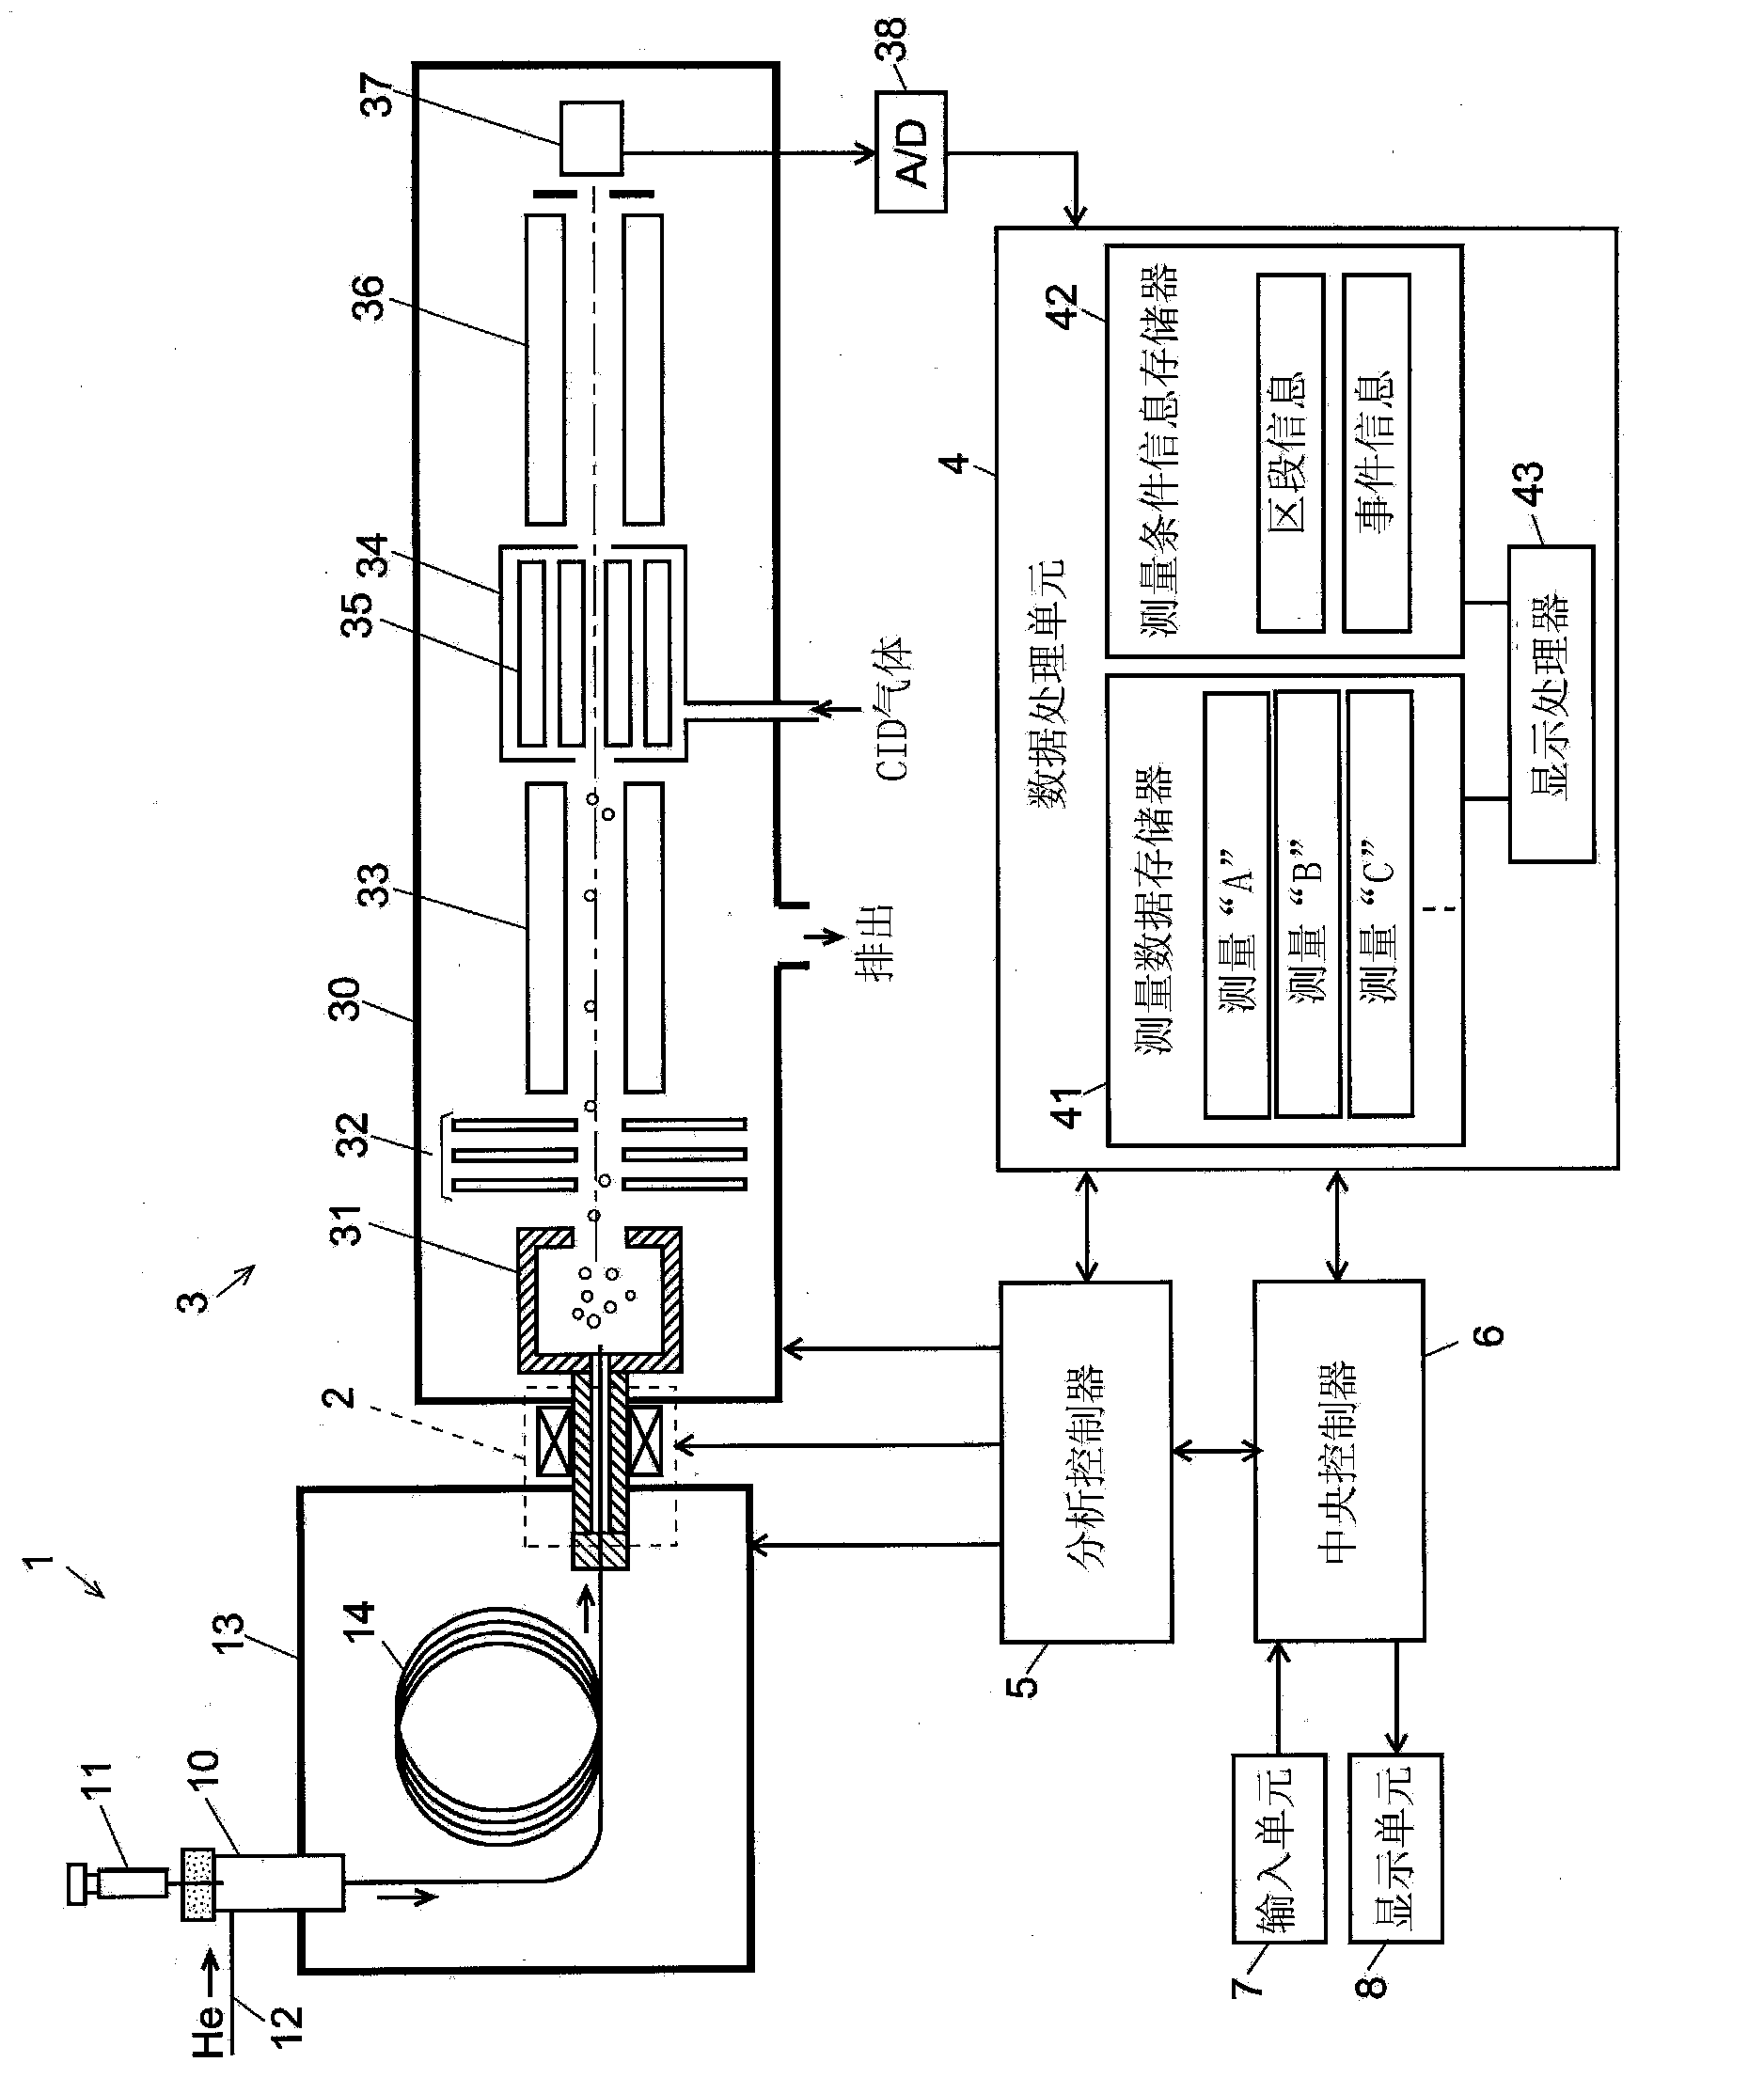 Data-processing system for chromatographic mass spectrometry